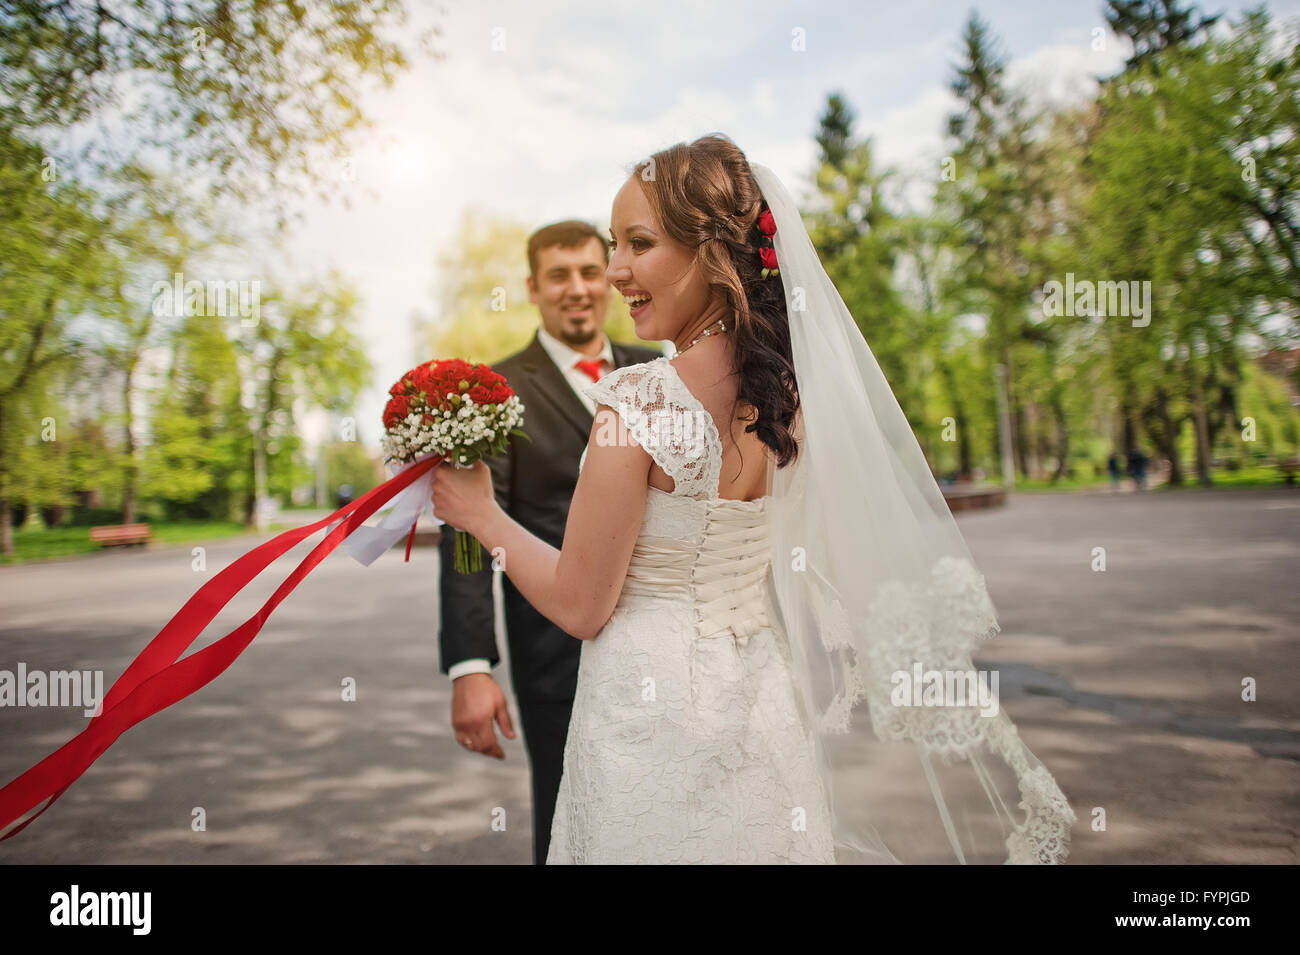 Dancing wedding couple with smiled emotions Stock Photo